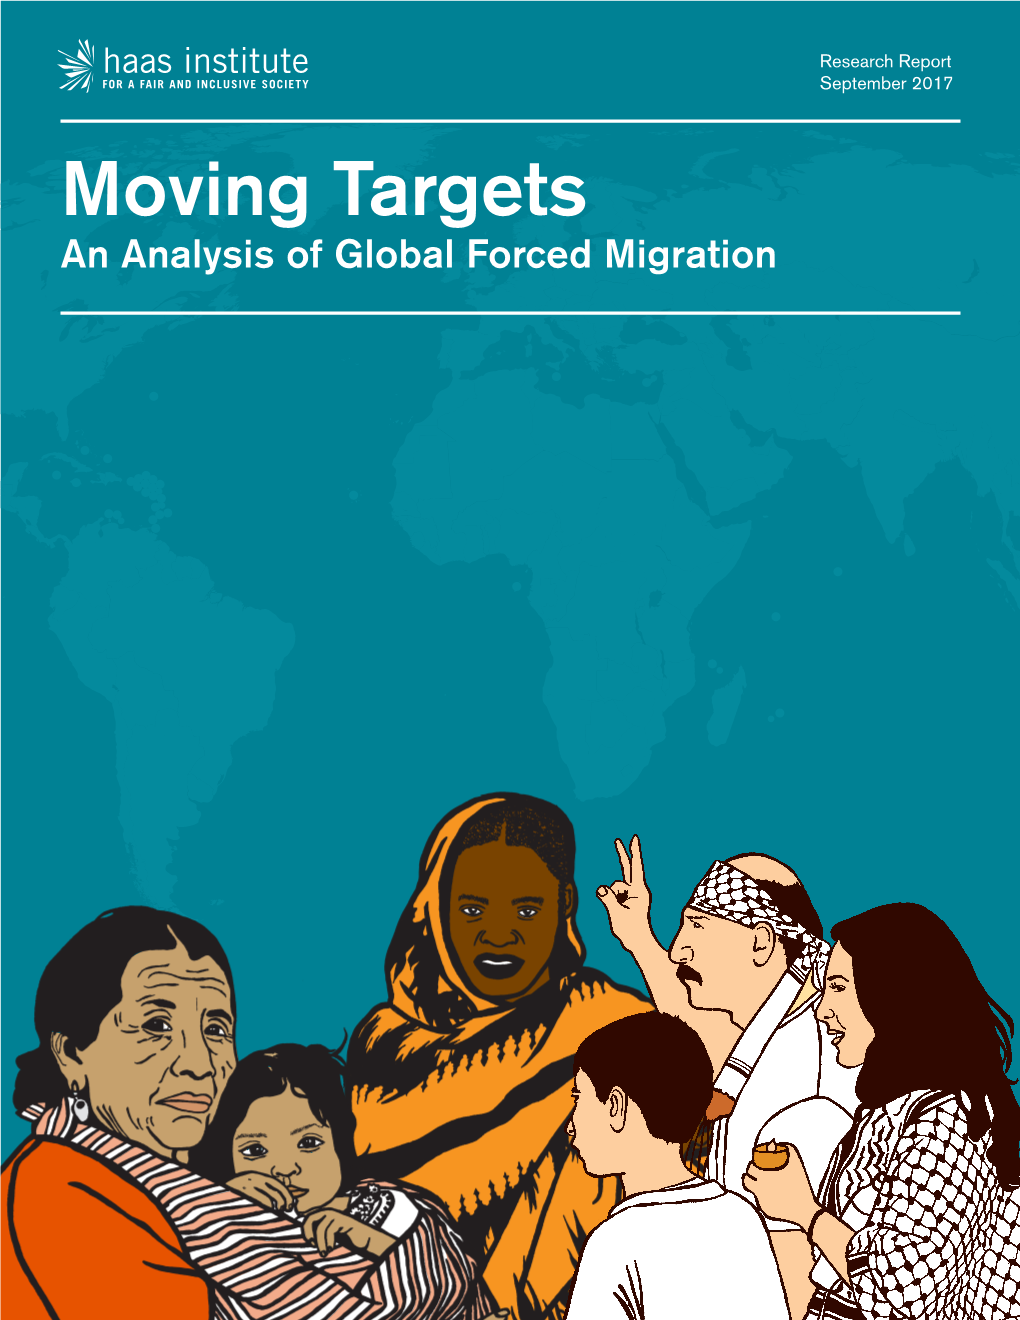 This Report, Moving Targets: an Analysis of Global Forced Migration